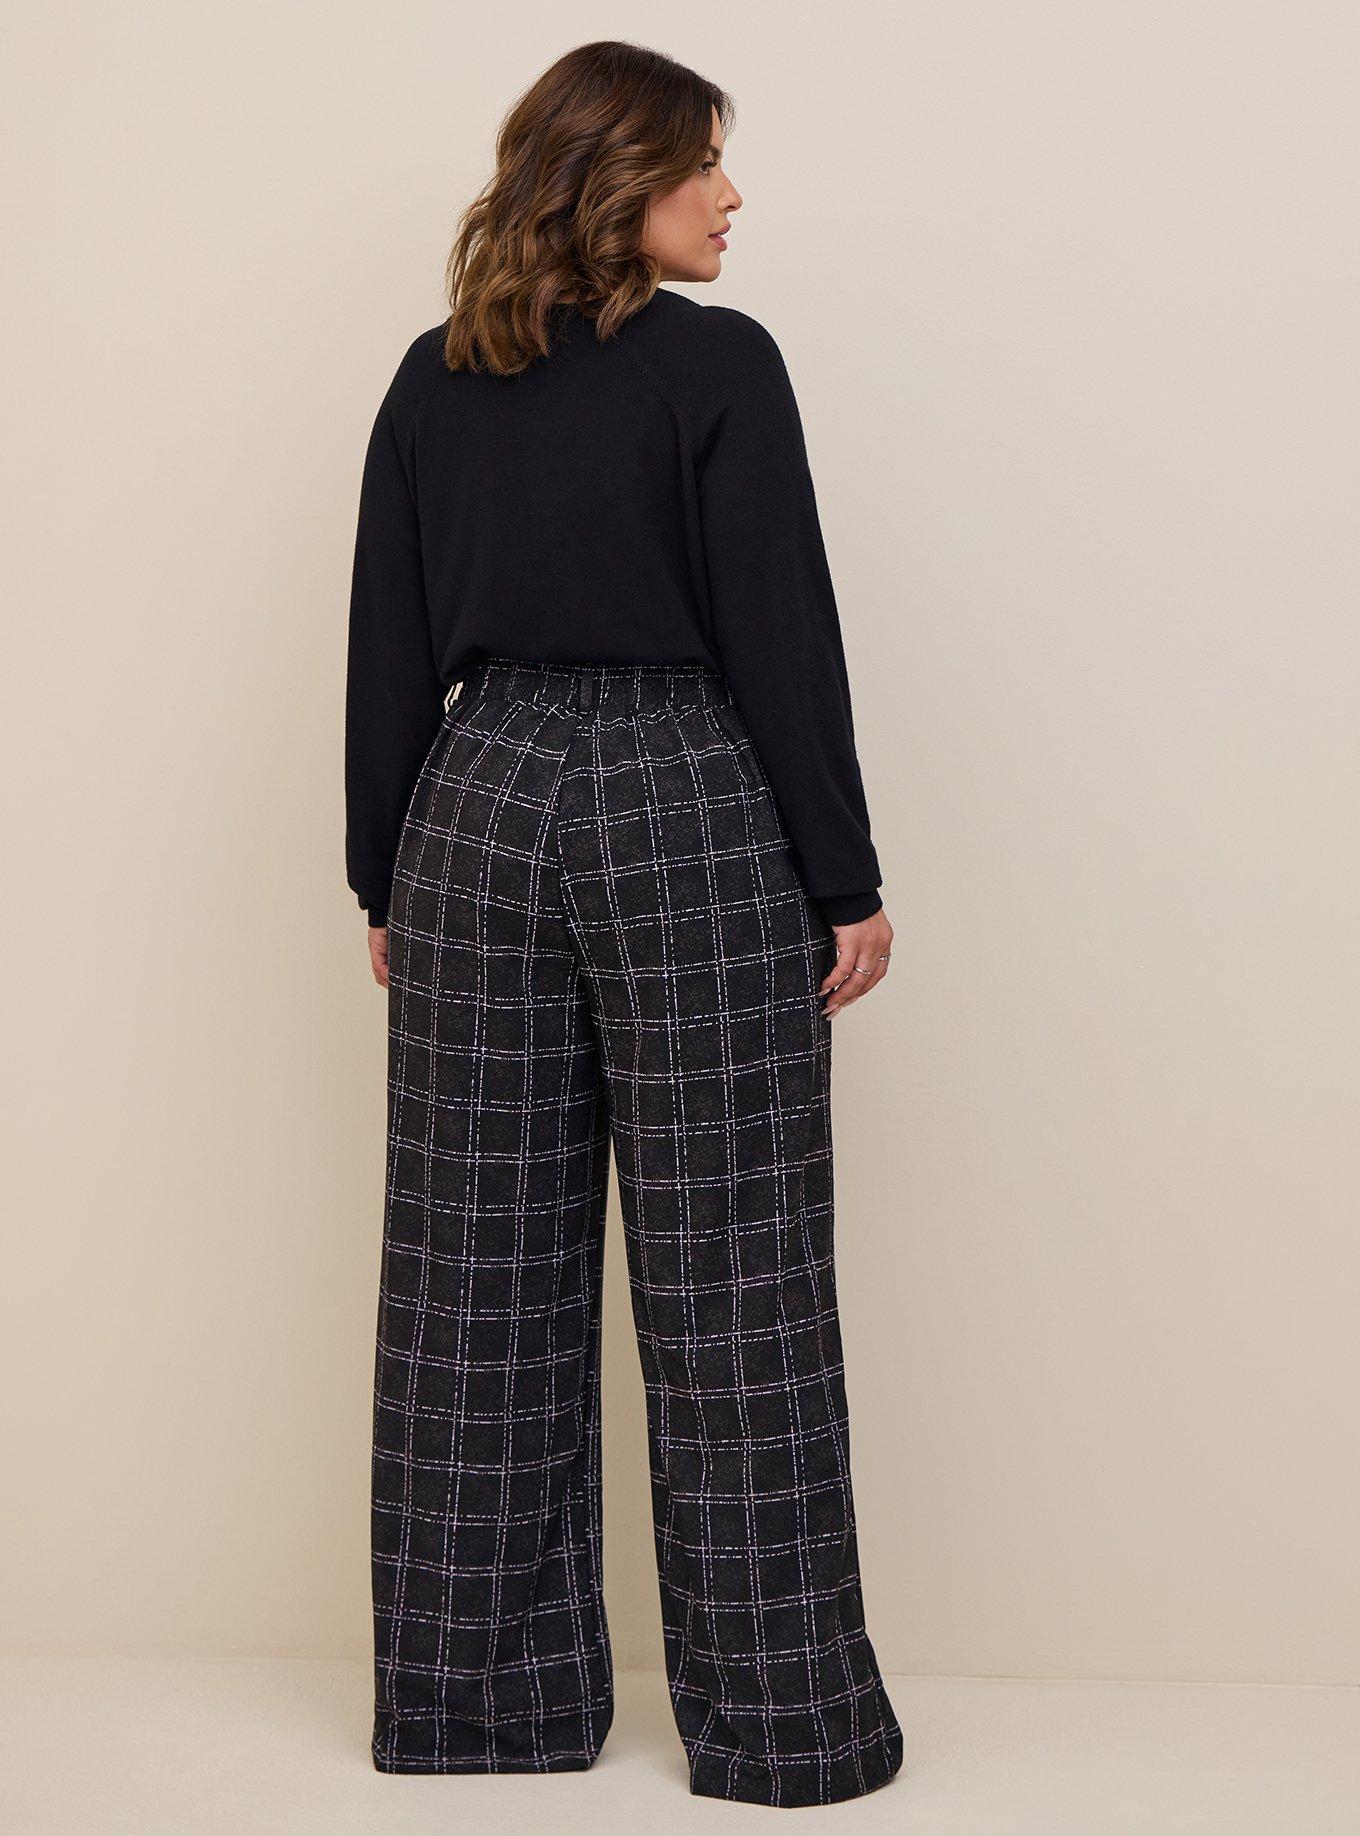 Tall Pull On Wide Leg Crop Pants in Crepe